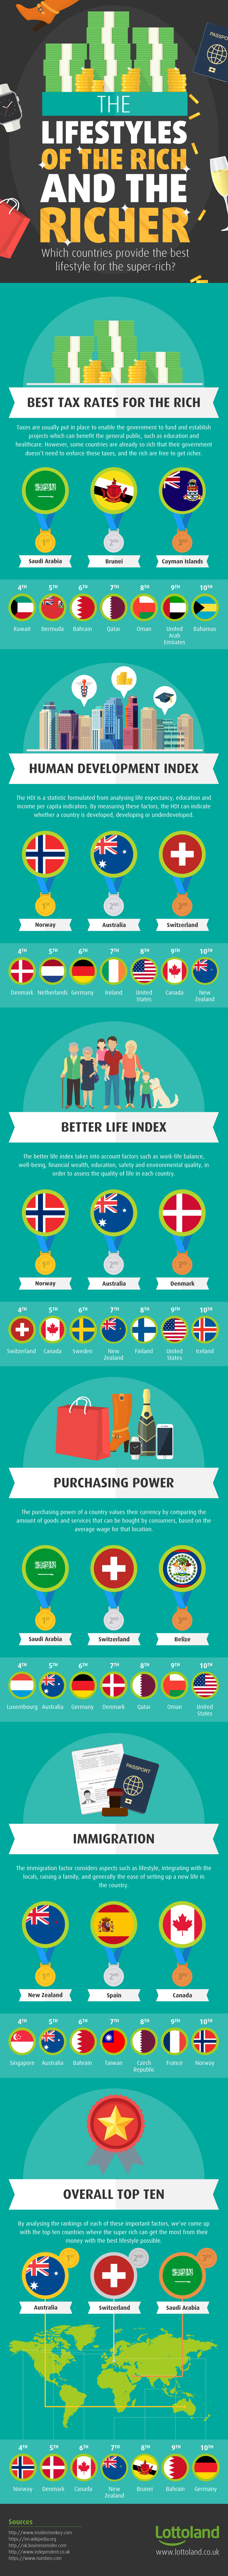 Best countries to live as a lottery winner